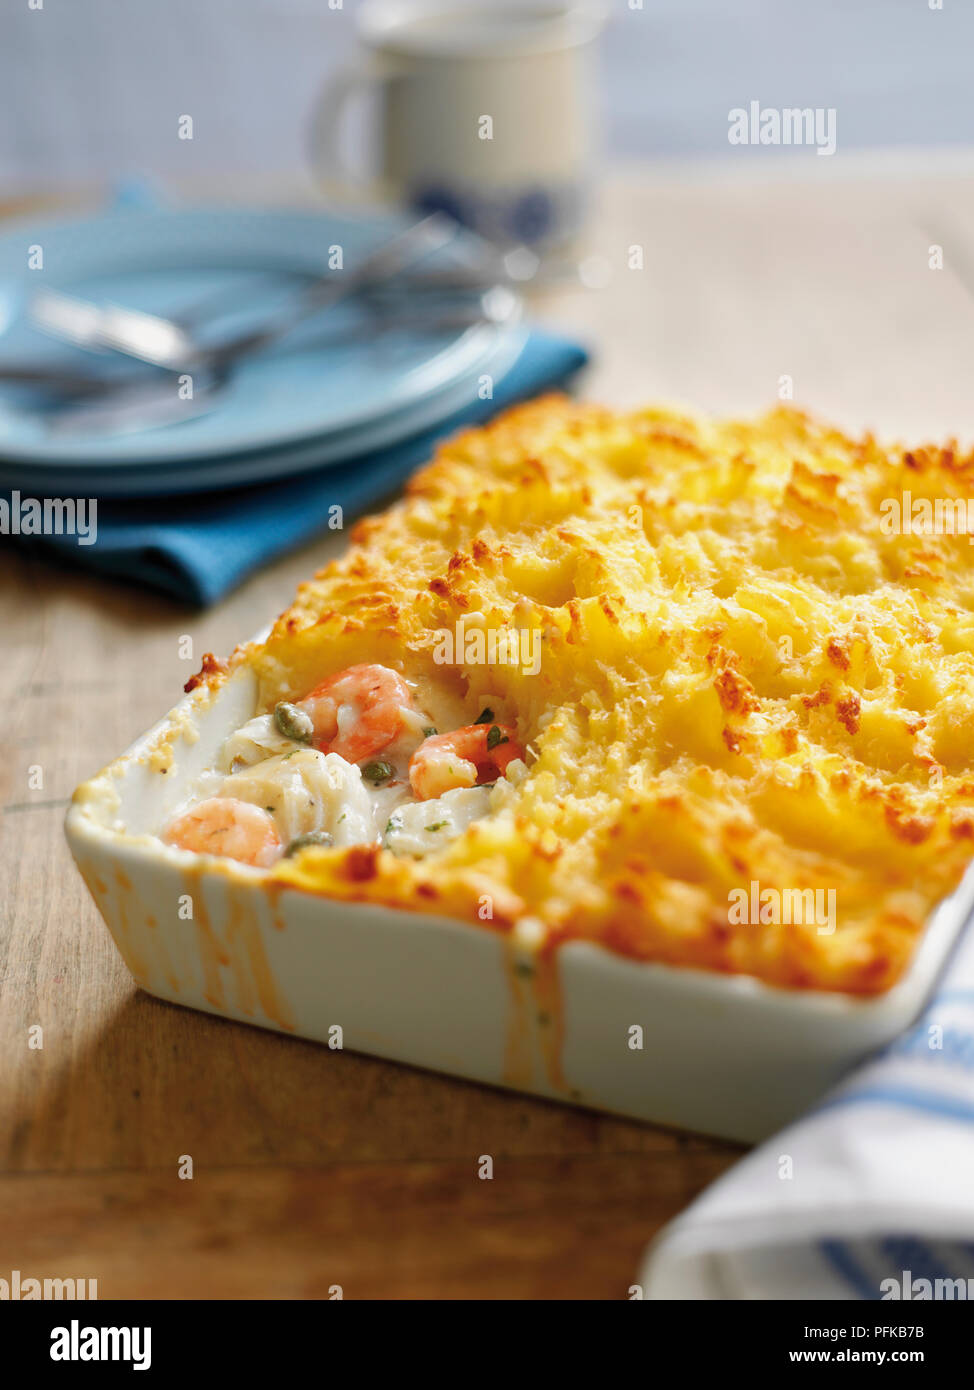 Fish pie in ceramic dish, plates, cutlery and mug in background Stock Photo